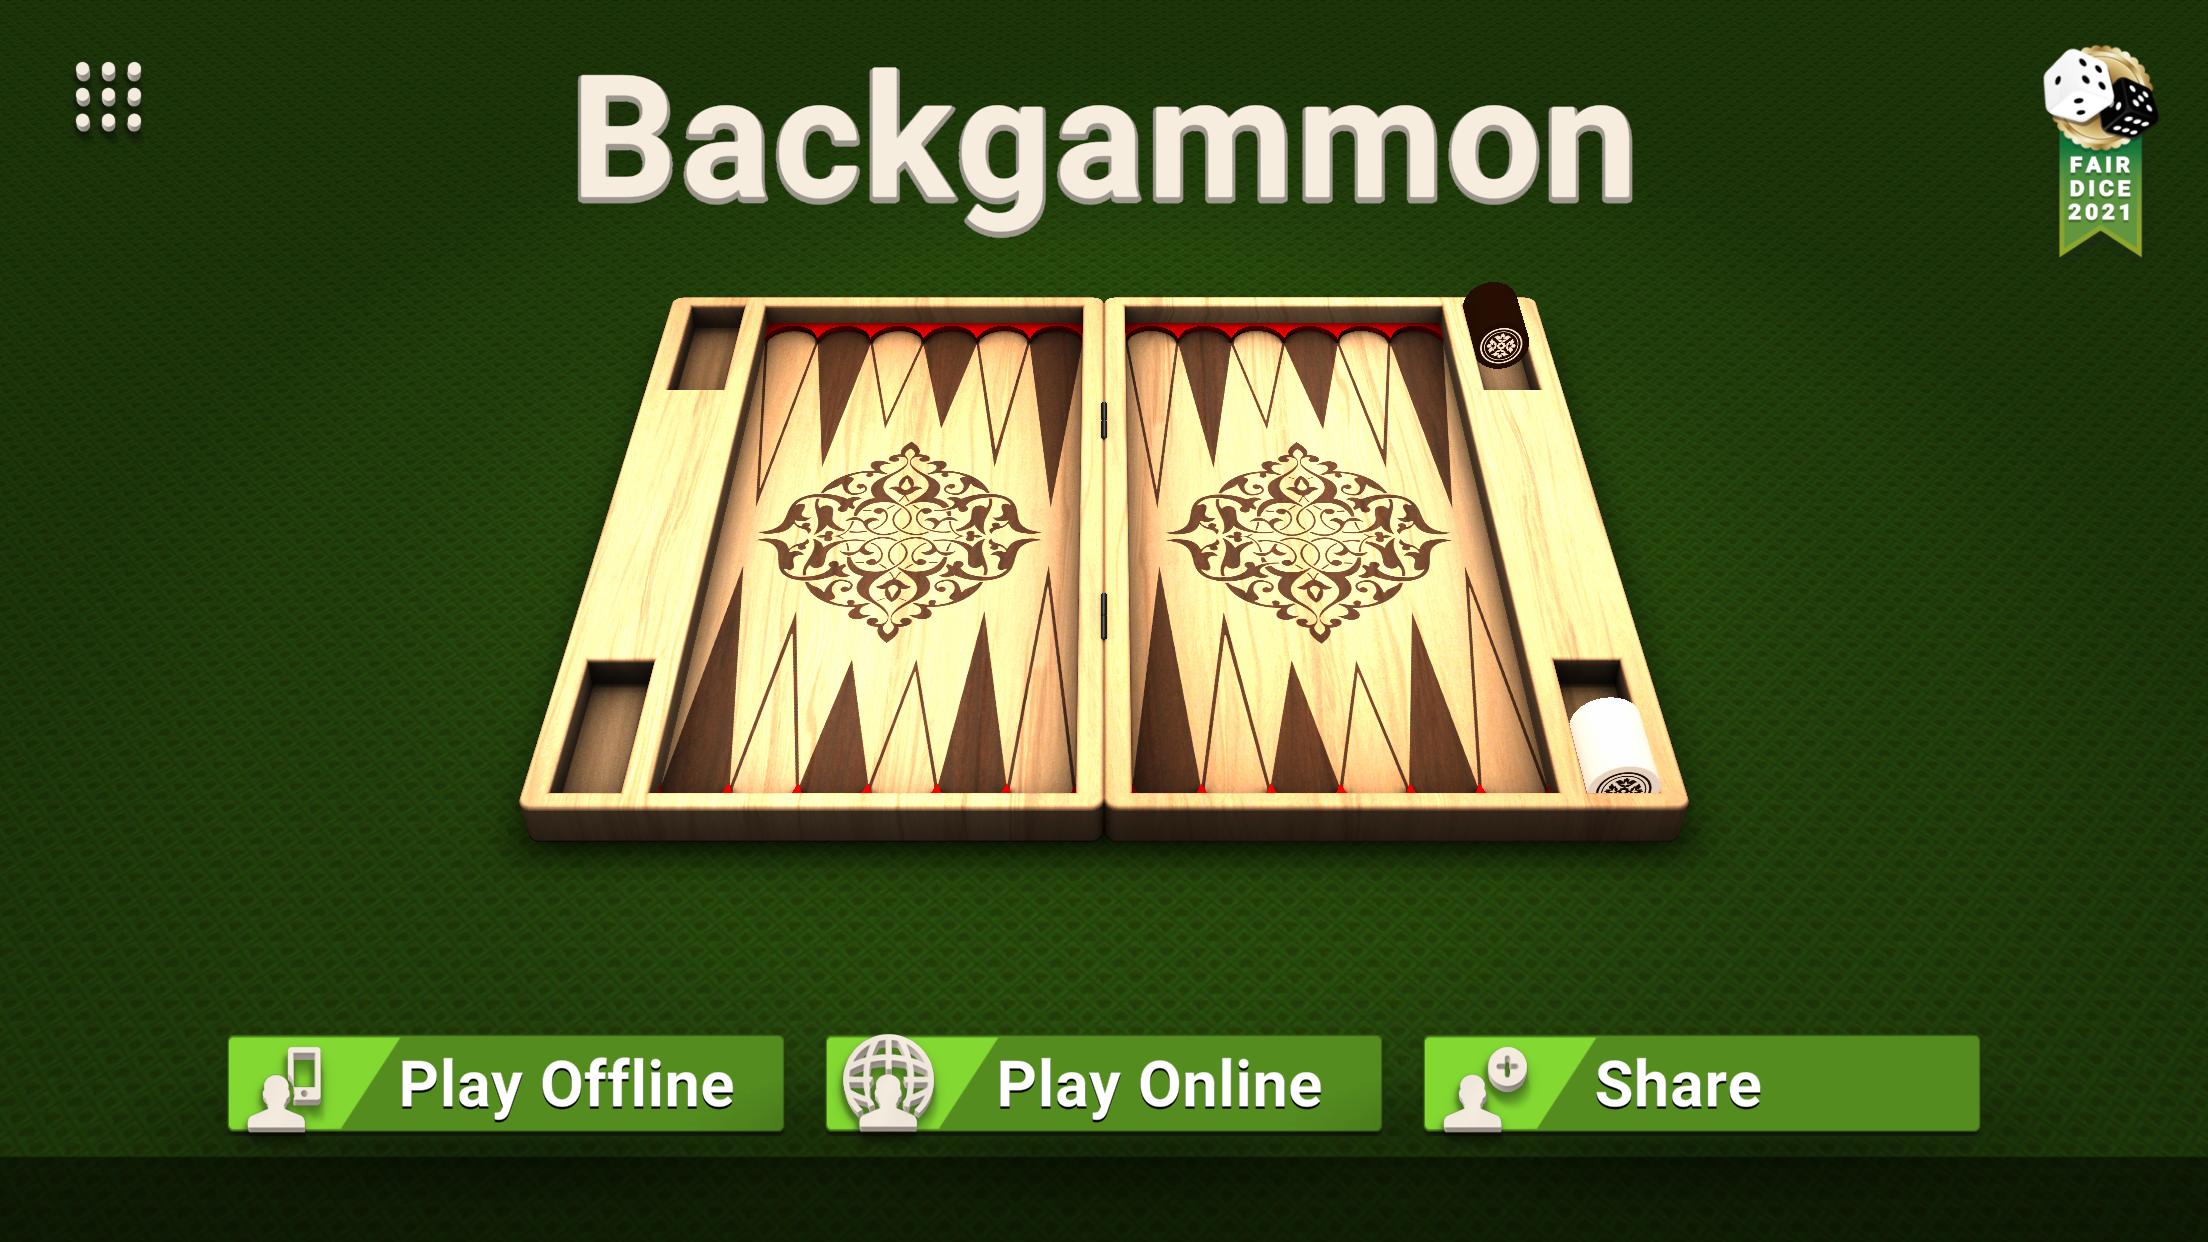 Backgammon Live - Online Games - Apps on Google Play